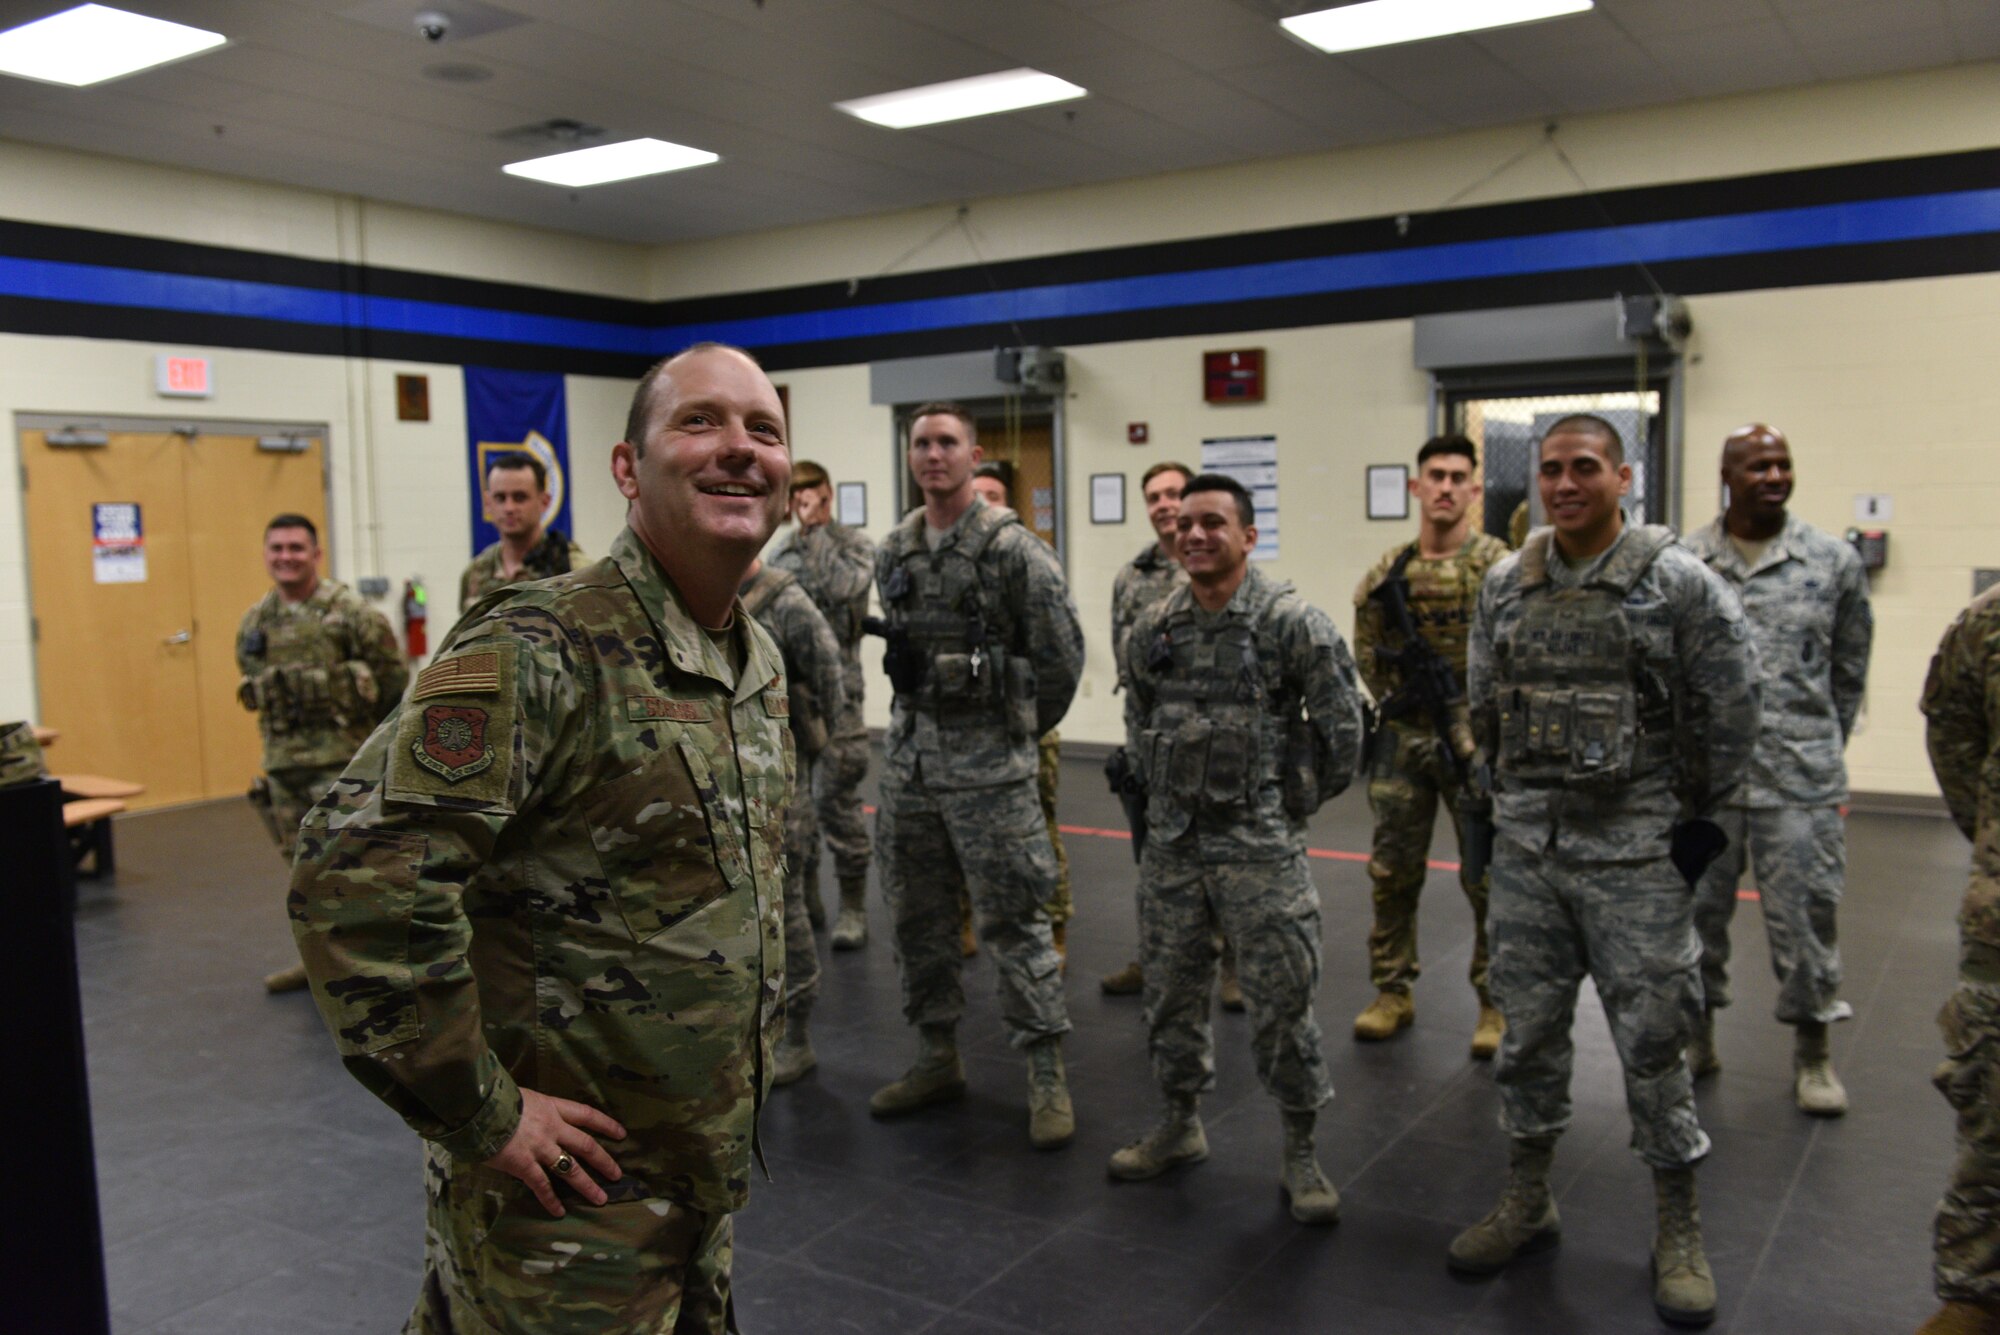 Brig Gen Doug Schiess, 45th Space Wing commander, and 45th Security Forces Airmen share a moment at Patrick Air Force Base, Fla., April 16, 2019. Schiess visited the 45th SFS to learn about new capabilities and to be immersed in the Security Forces mission. (U.S. Air Force photo by Airman 1st Class Dalton Williams)